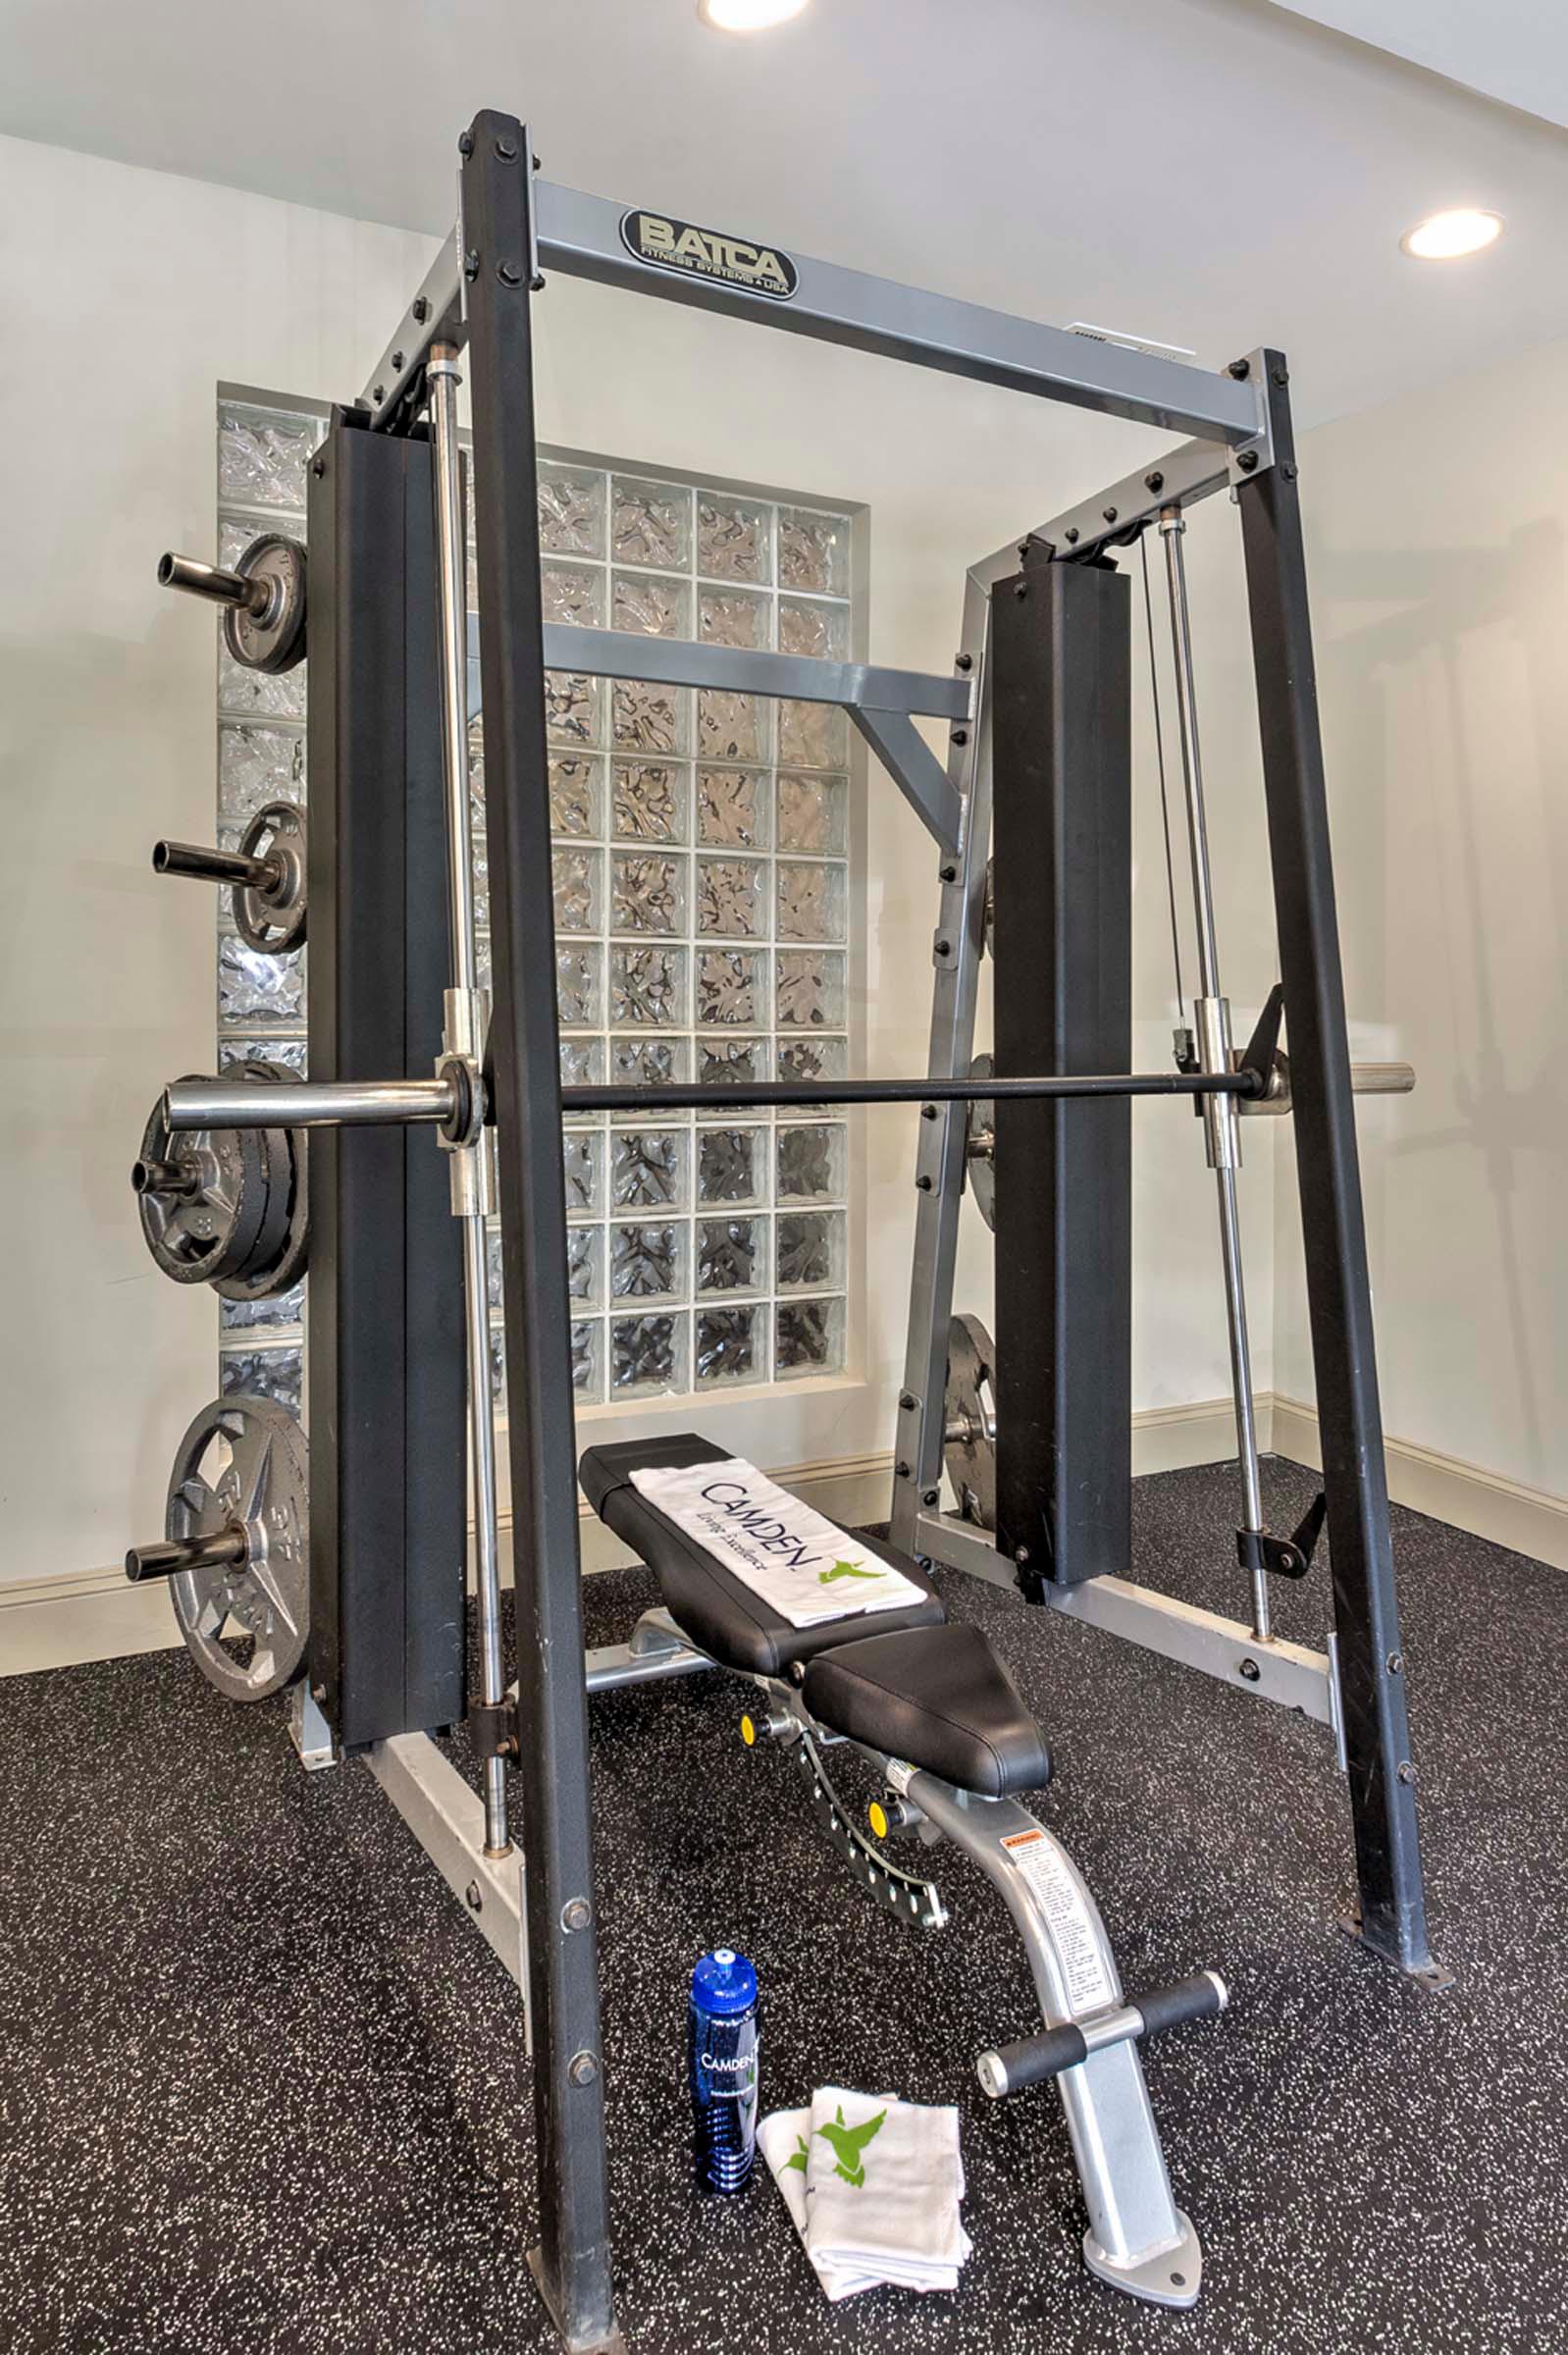 Expansive fitness center free weights